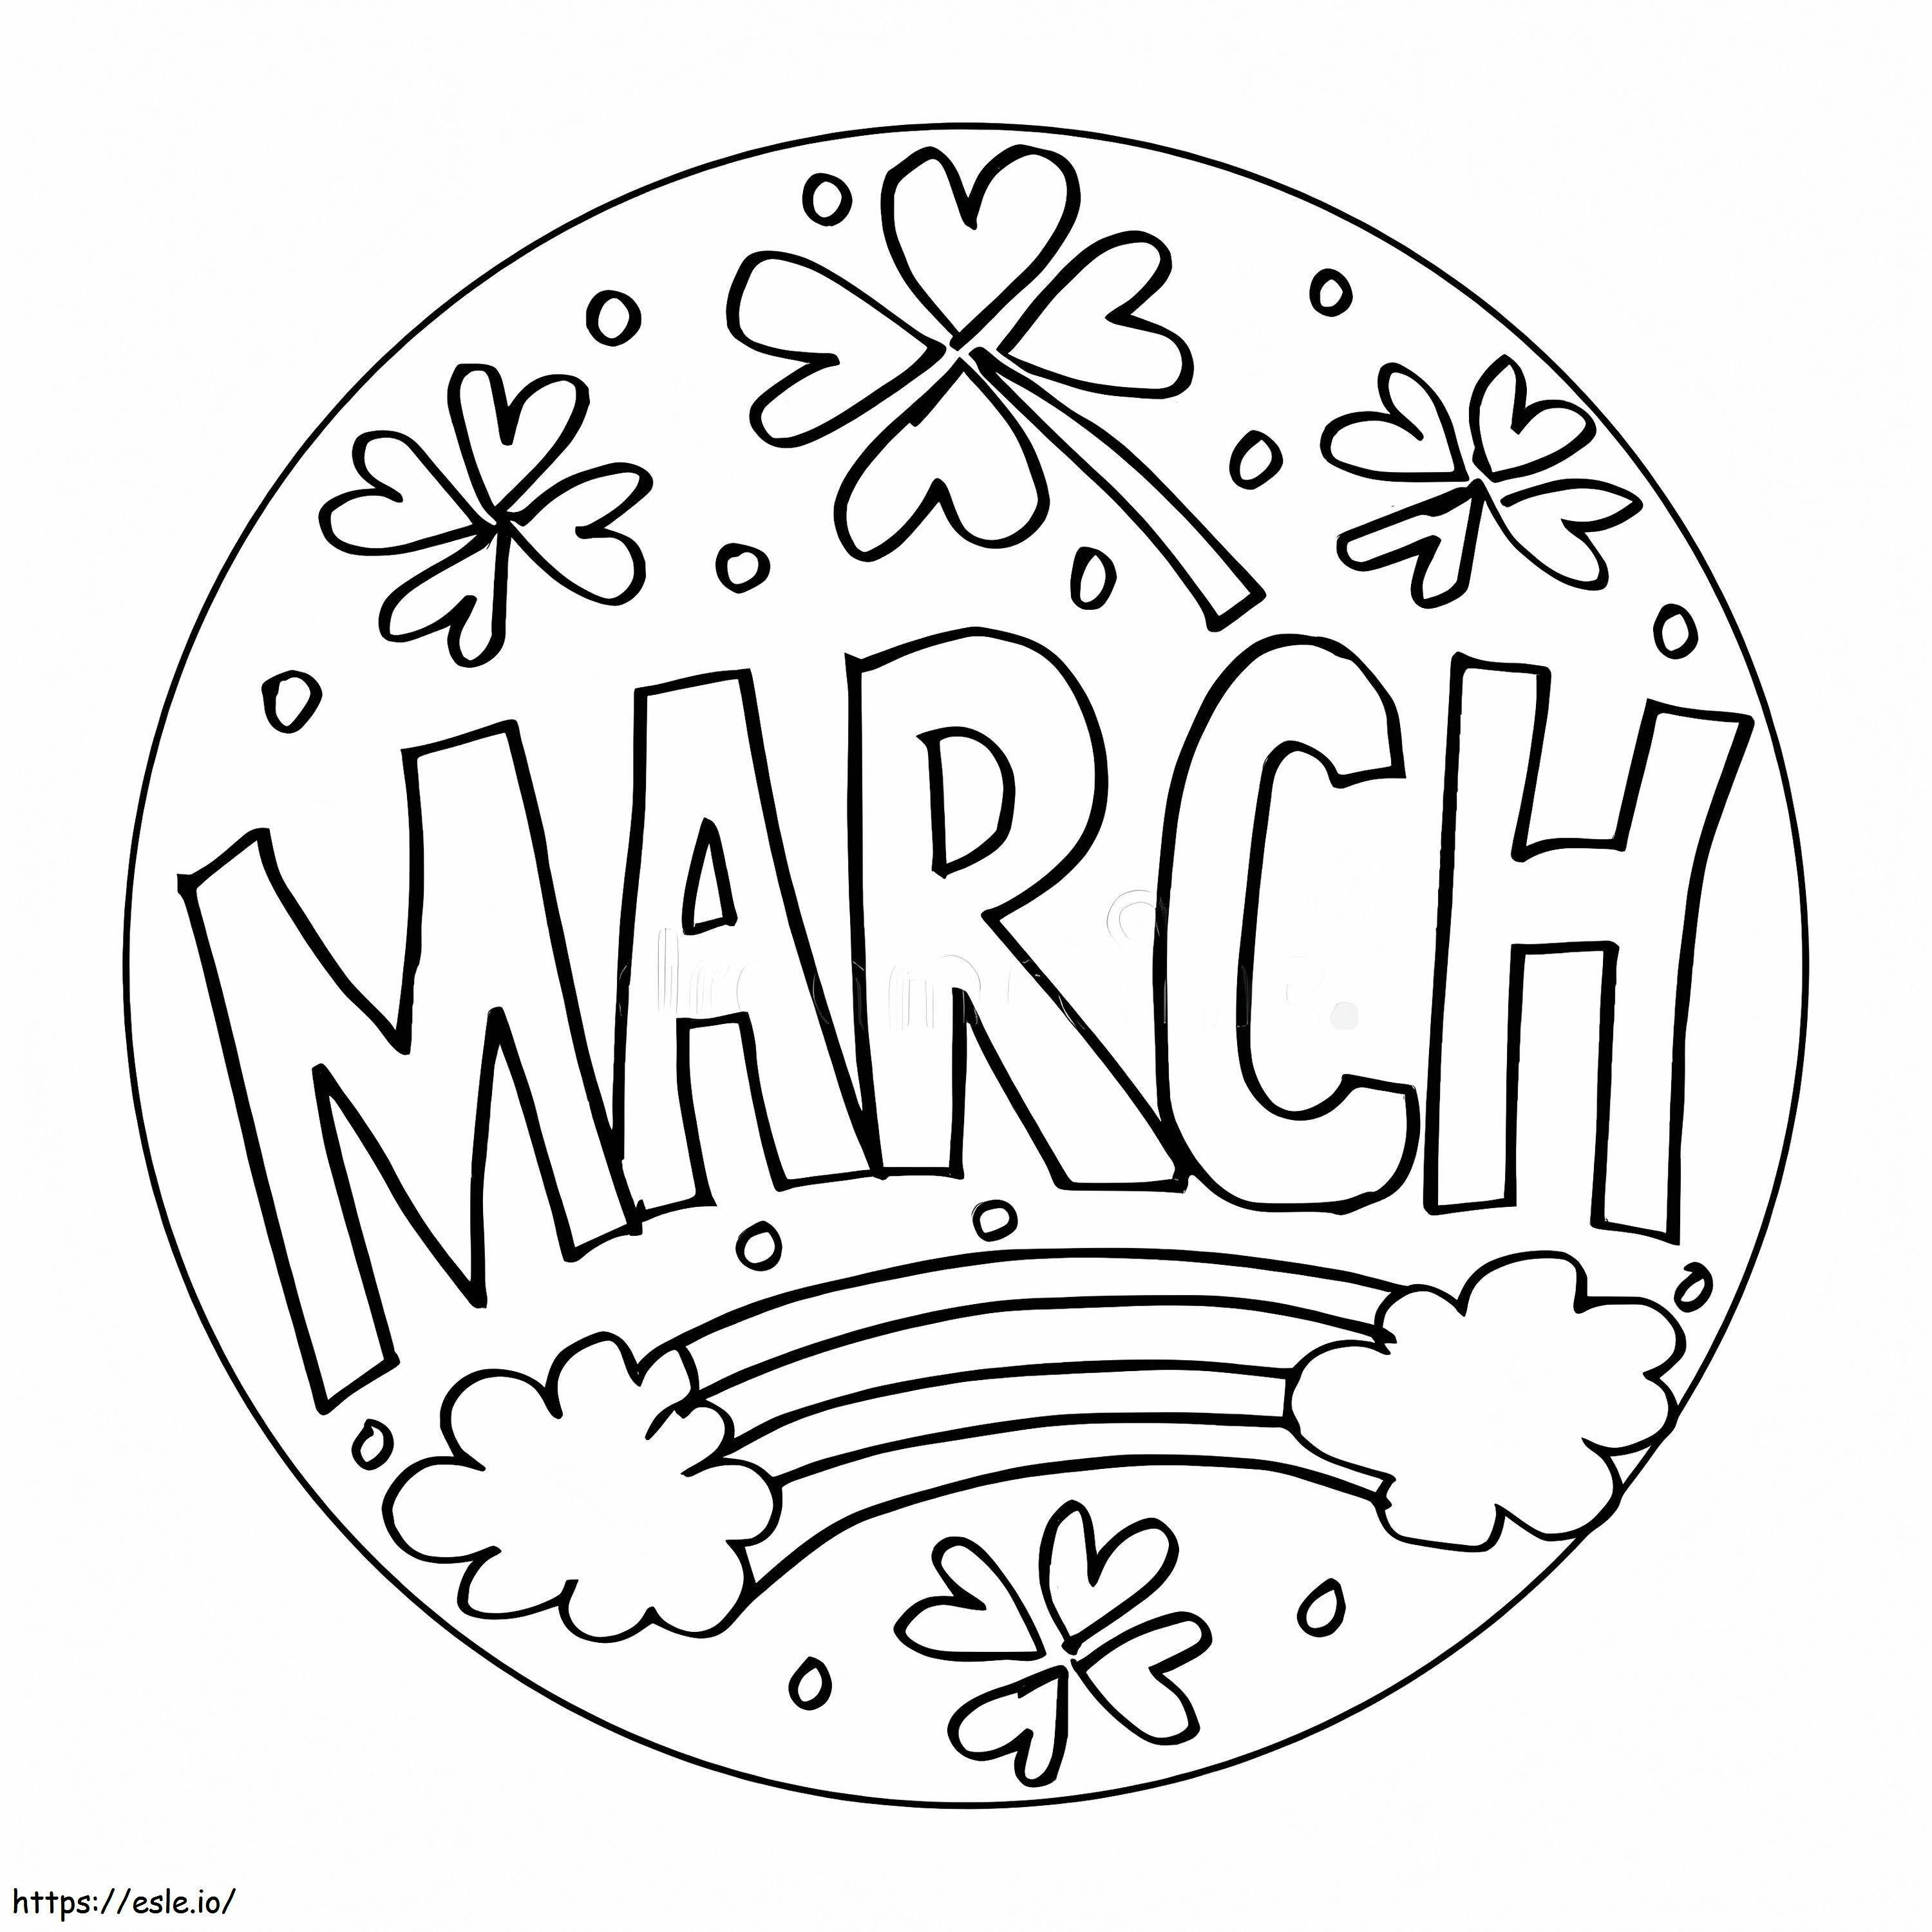 March 3Rd coloring page